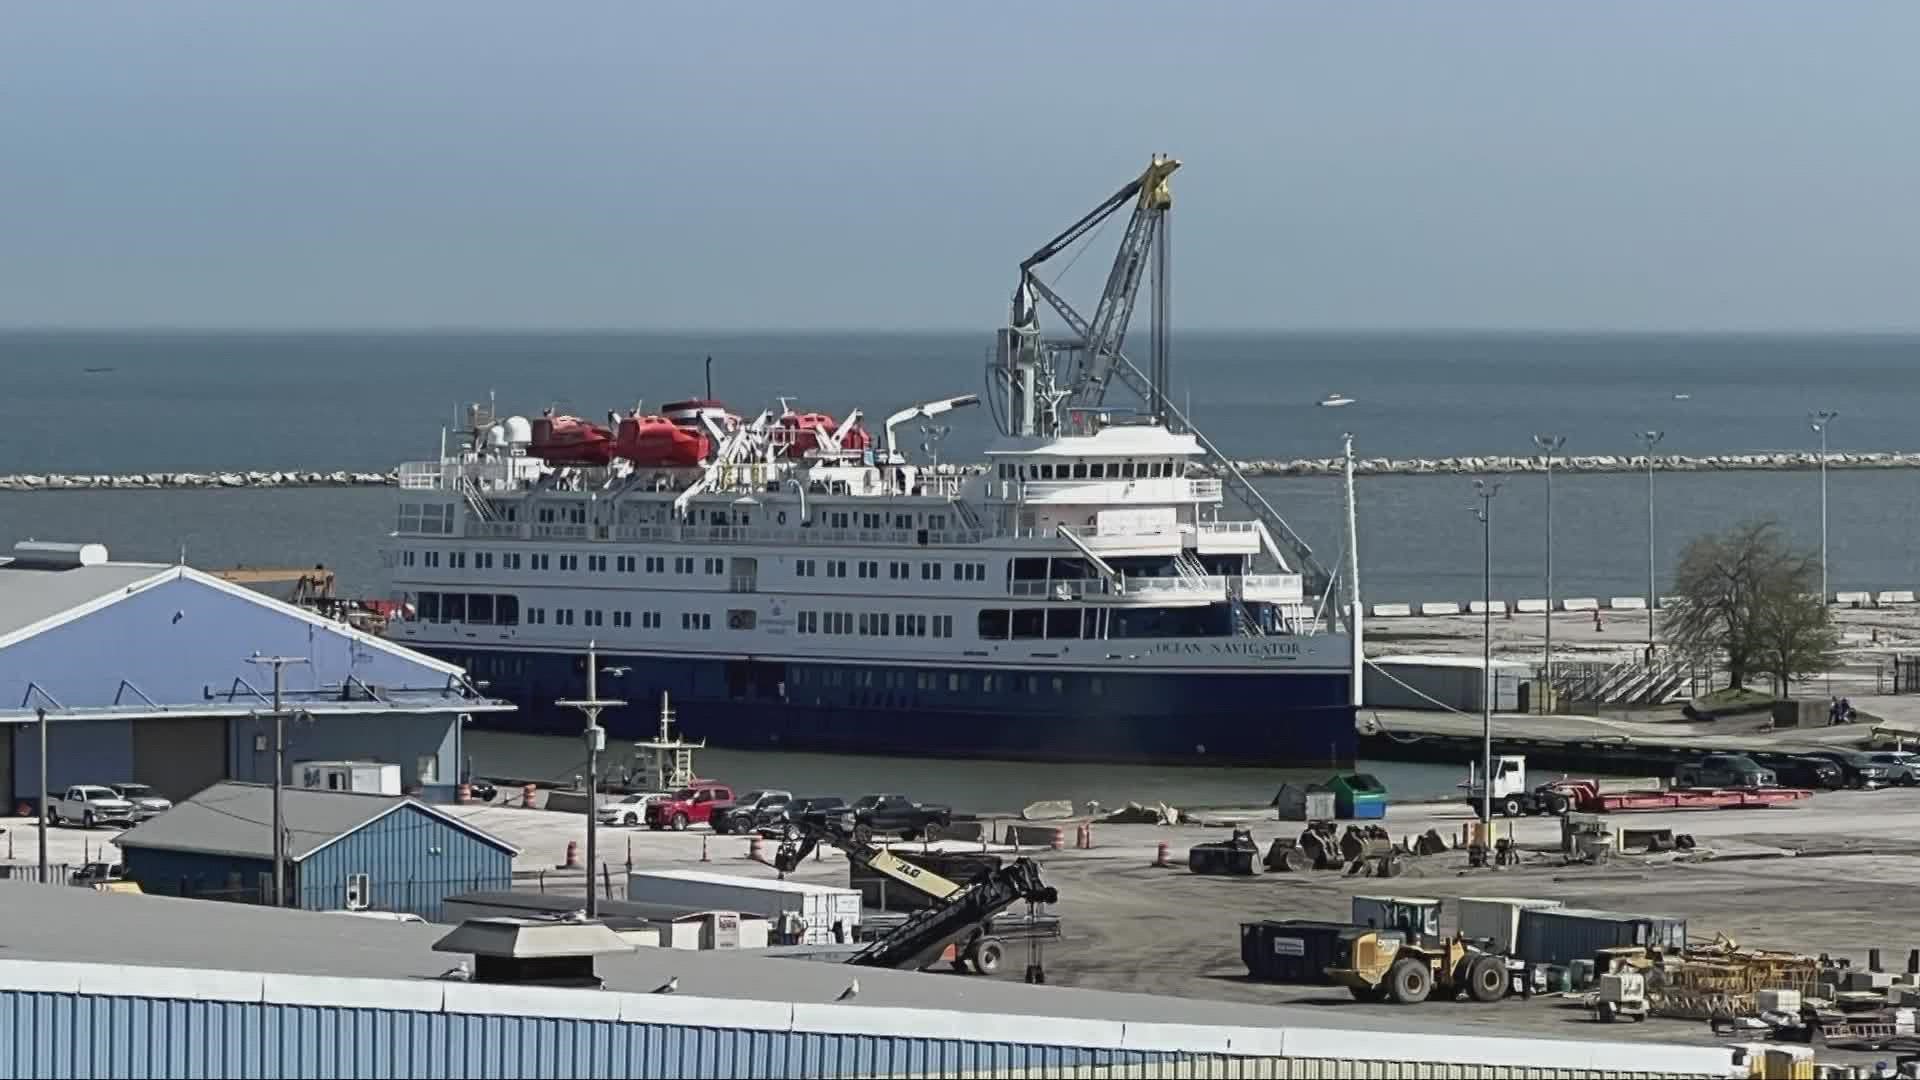 While the first cruise ship already headed back out onto Lake Erie, there's a brand new ship that is coming to port tomorrow that has everyone thrilled.